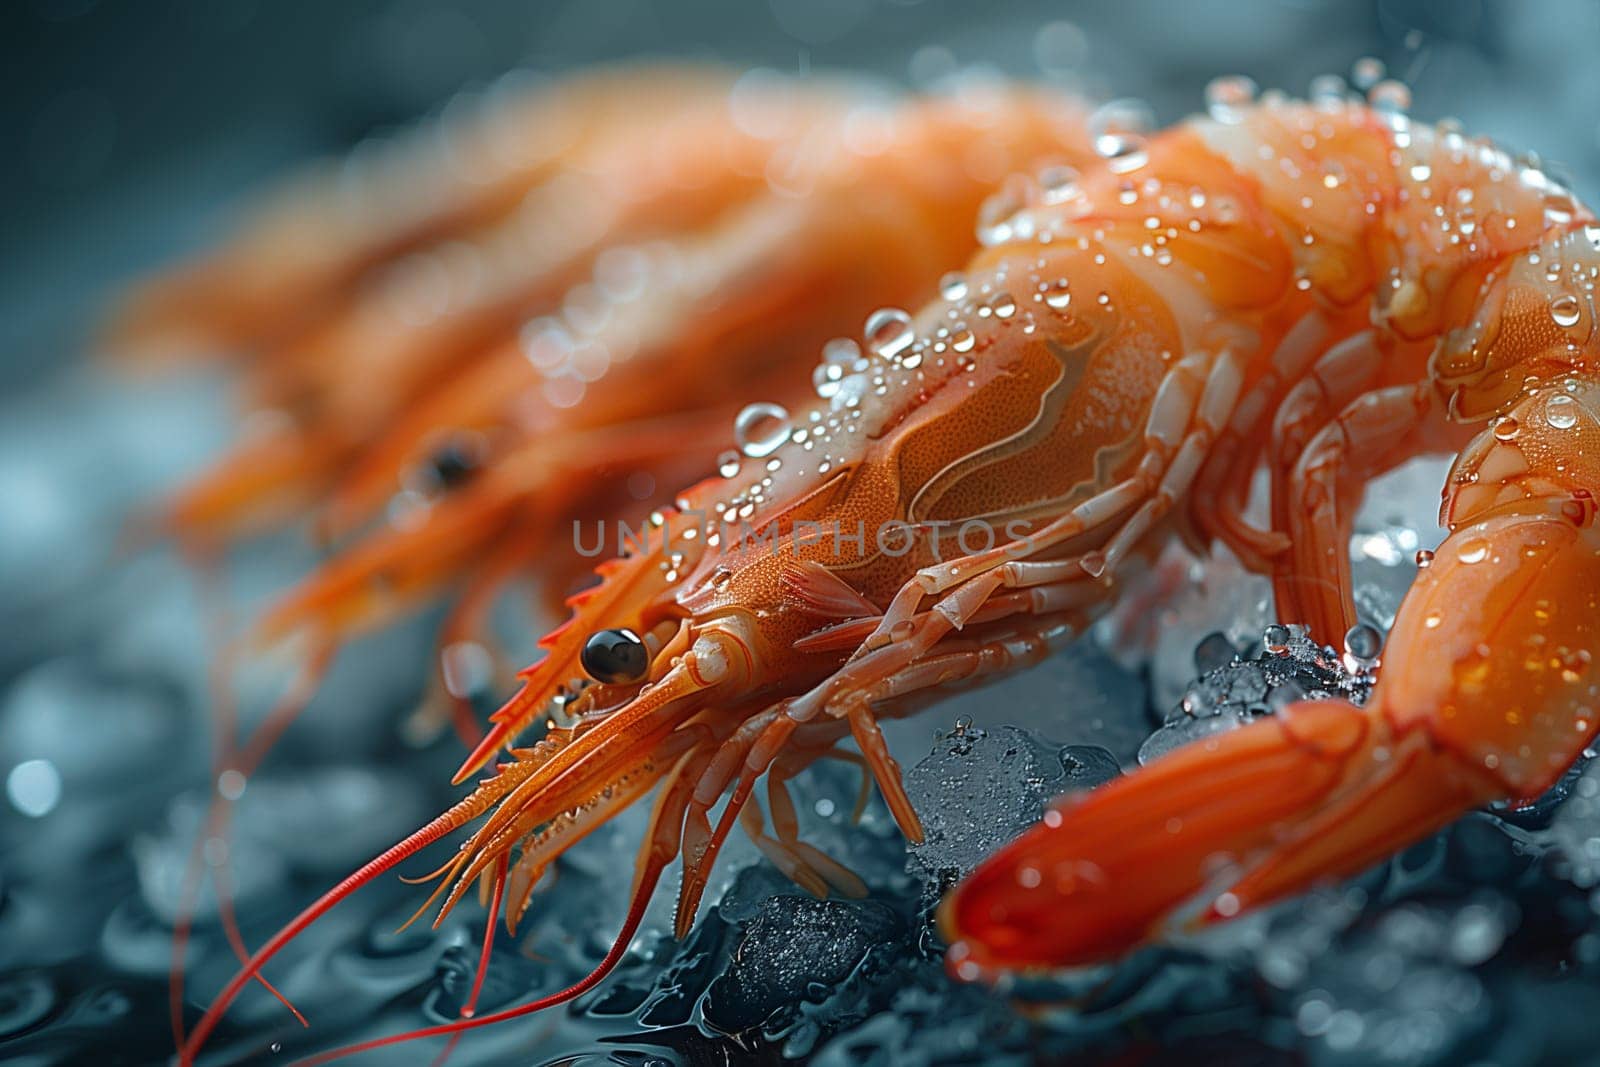 A detailed view of a shrimp resting on a bed of ice, showcasing its intricate features and texture.